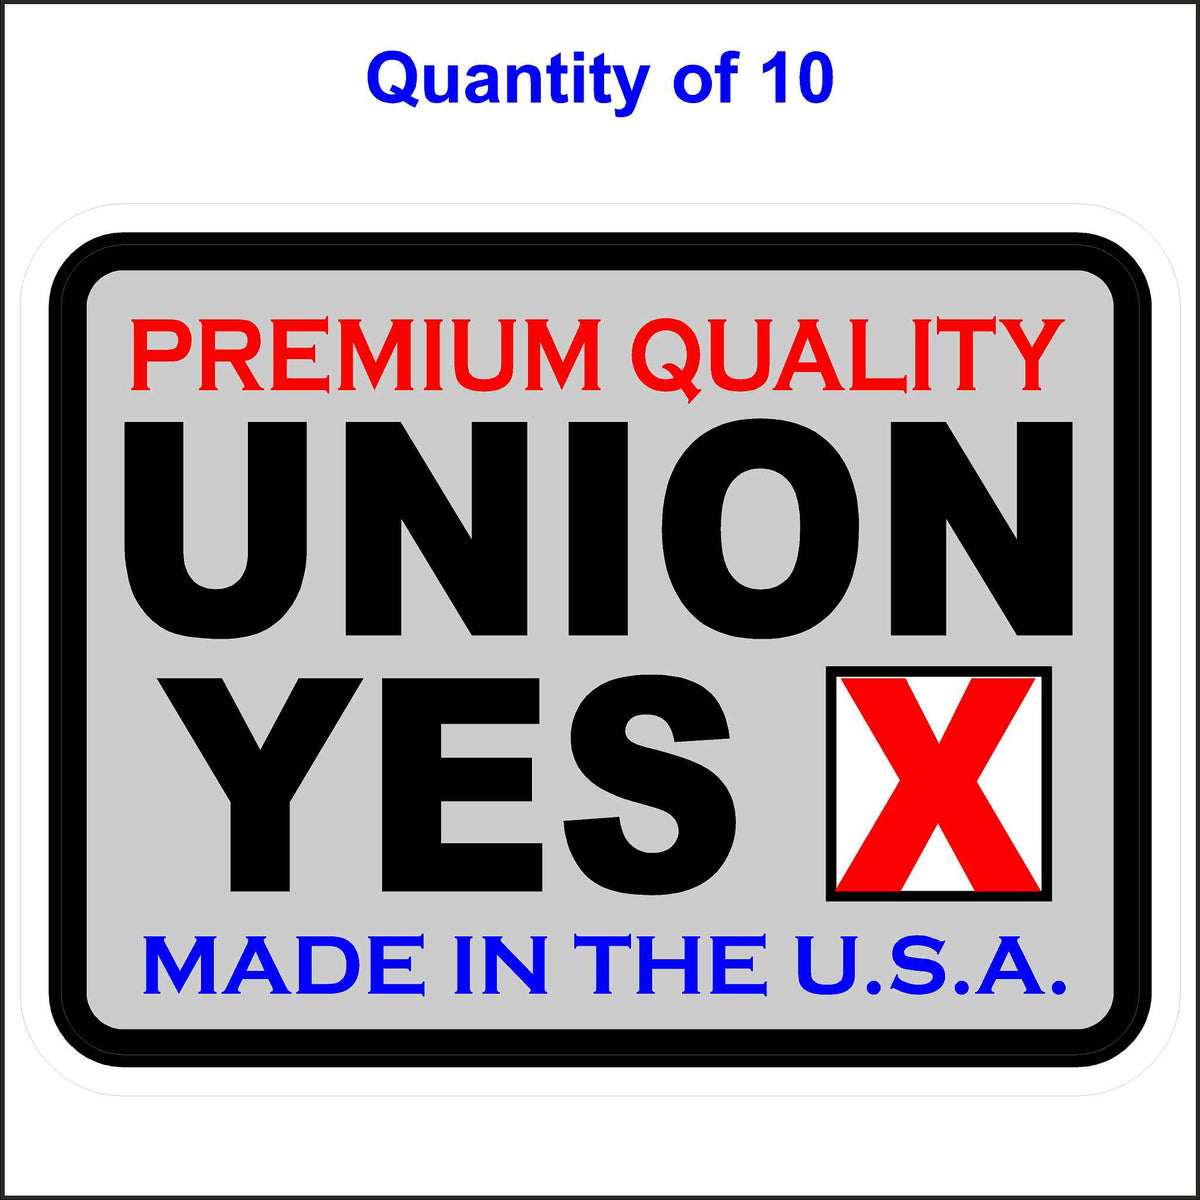 Union Stickers Made in the USA Premium Quality Union Yes. 10 Quantity.